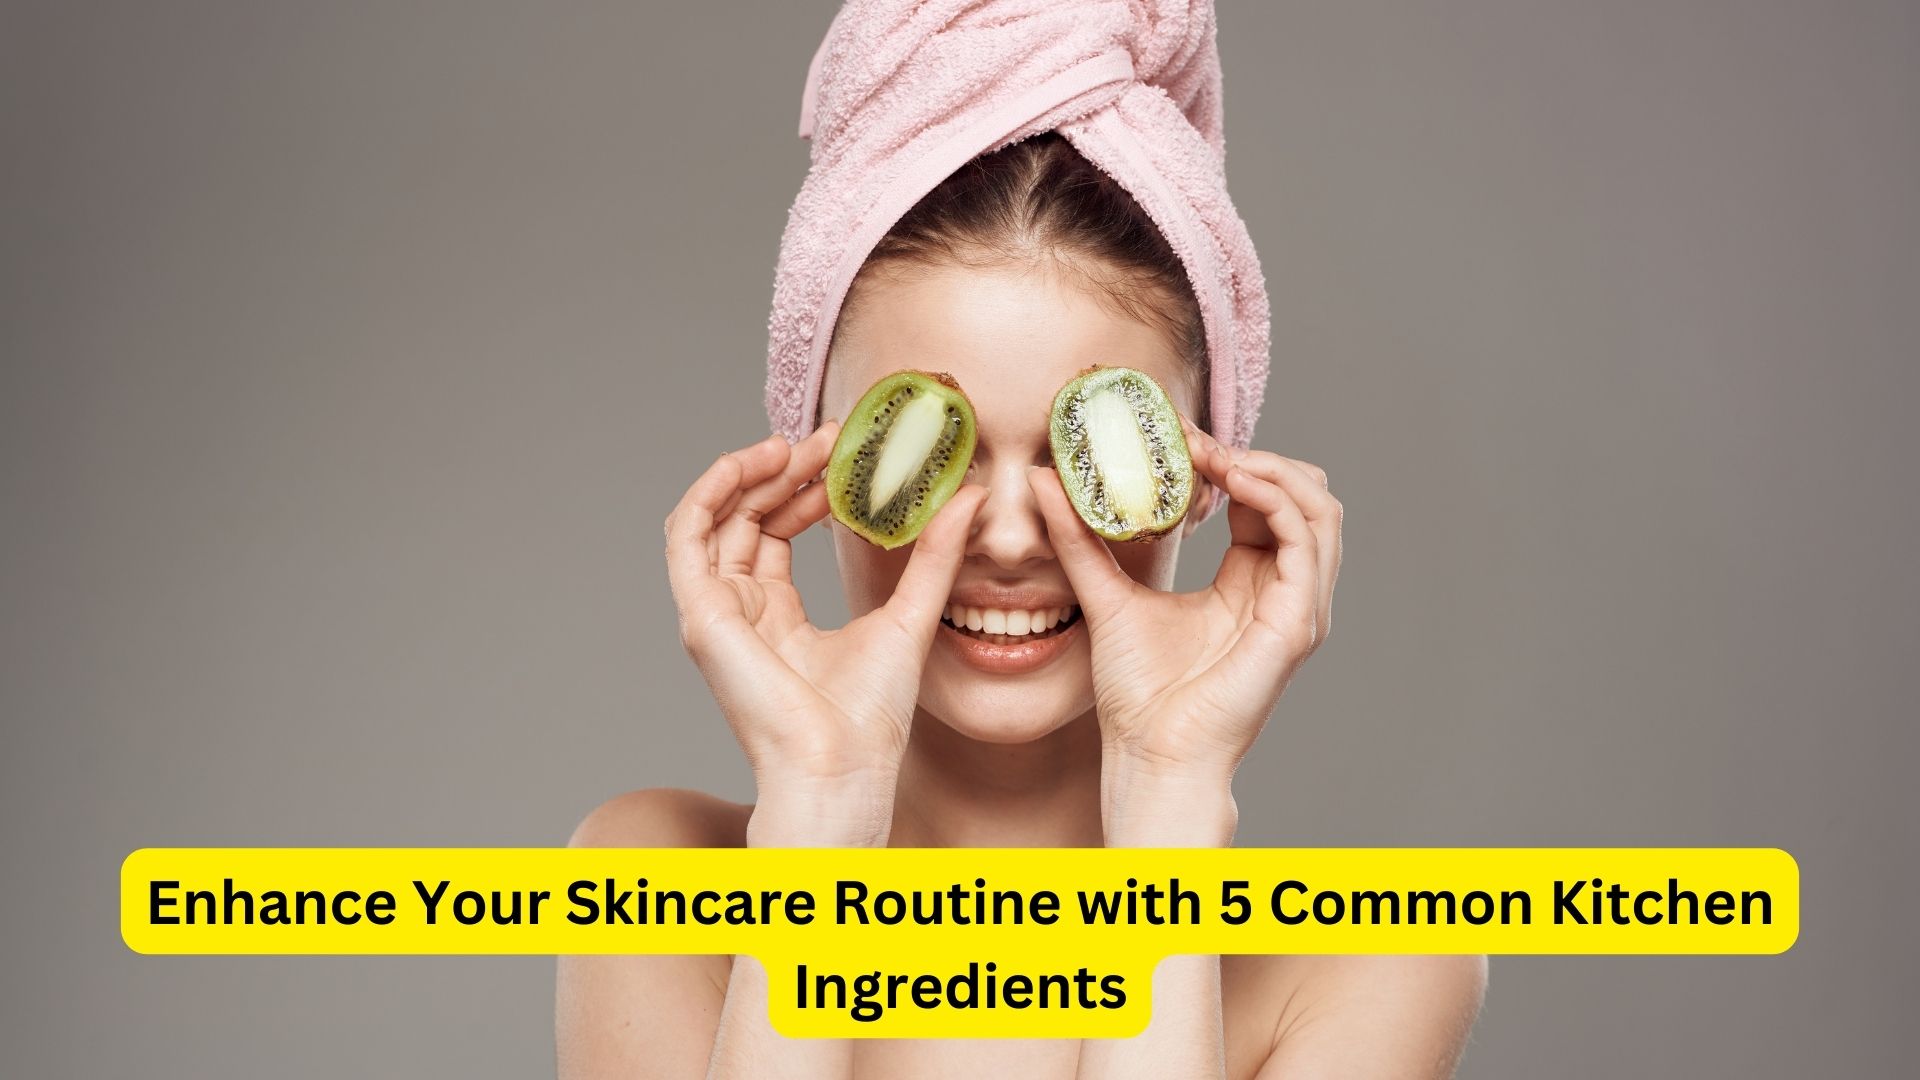 Enhance Your Skincare Routine with 5 Common Kitchen Ingredients